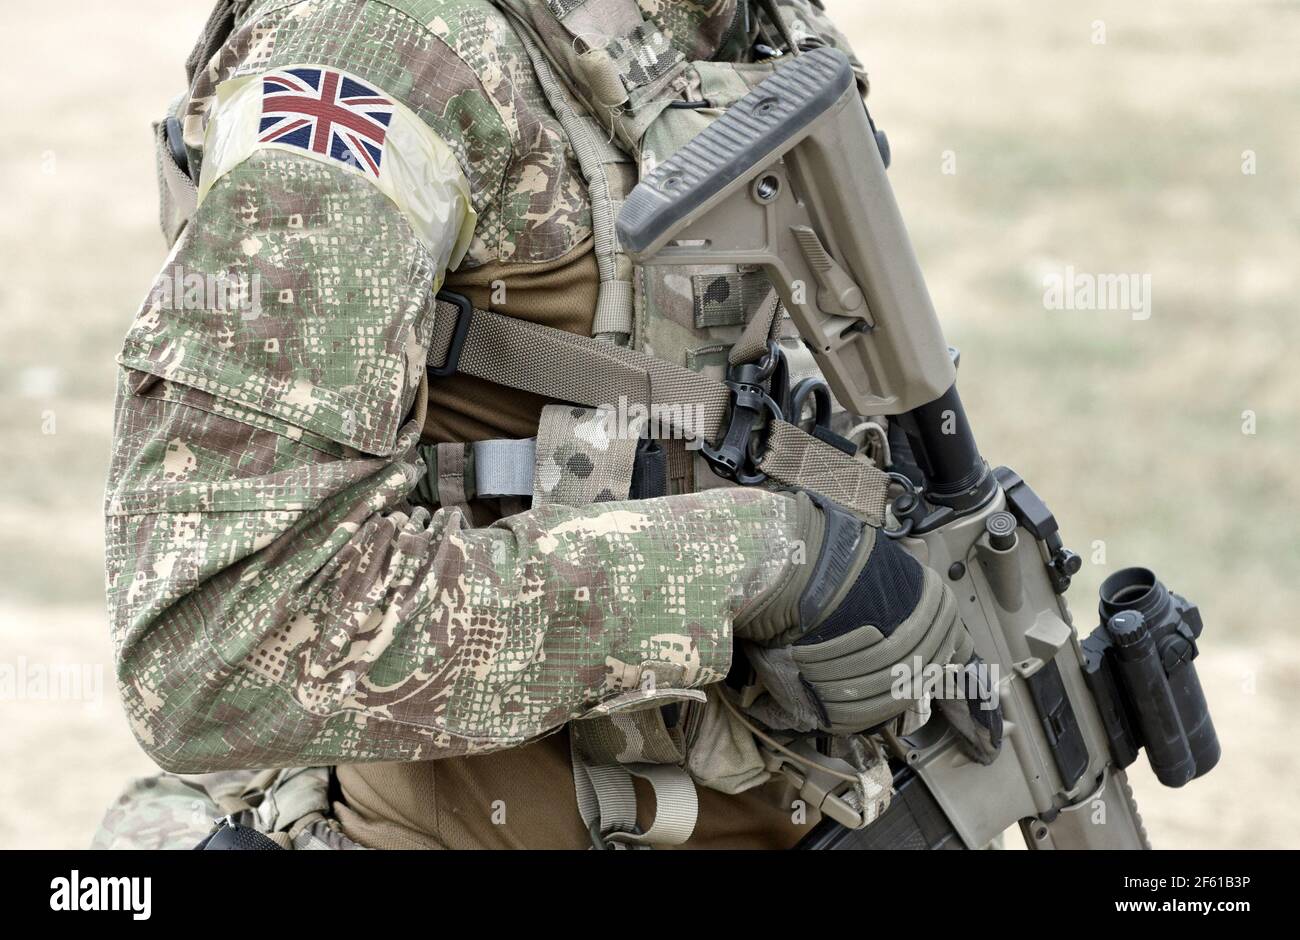 Soldier with assault rifle and flag of United Kingdom on military uniform. Collage. Stock Photo